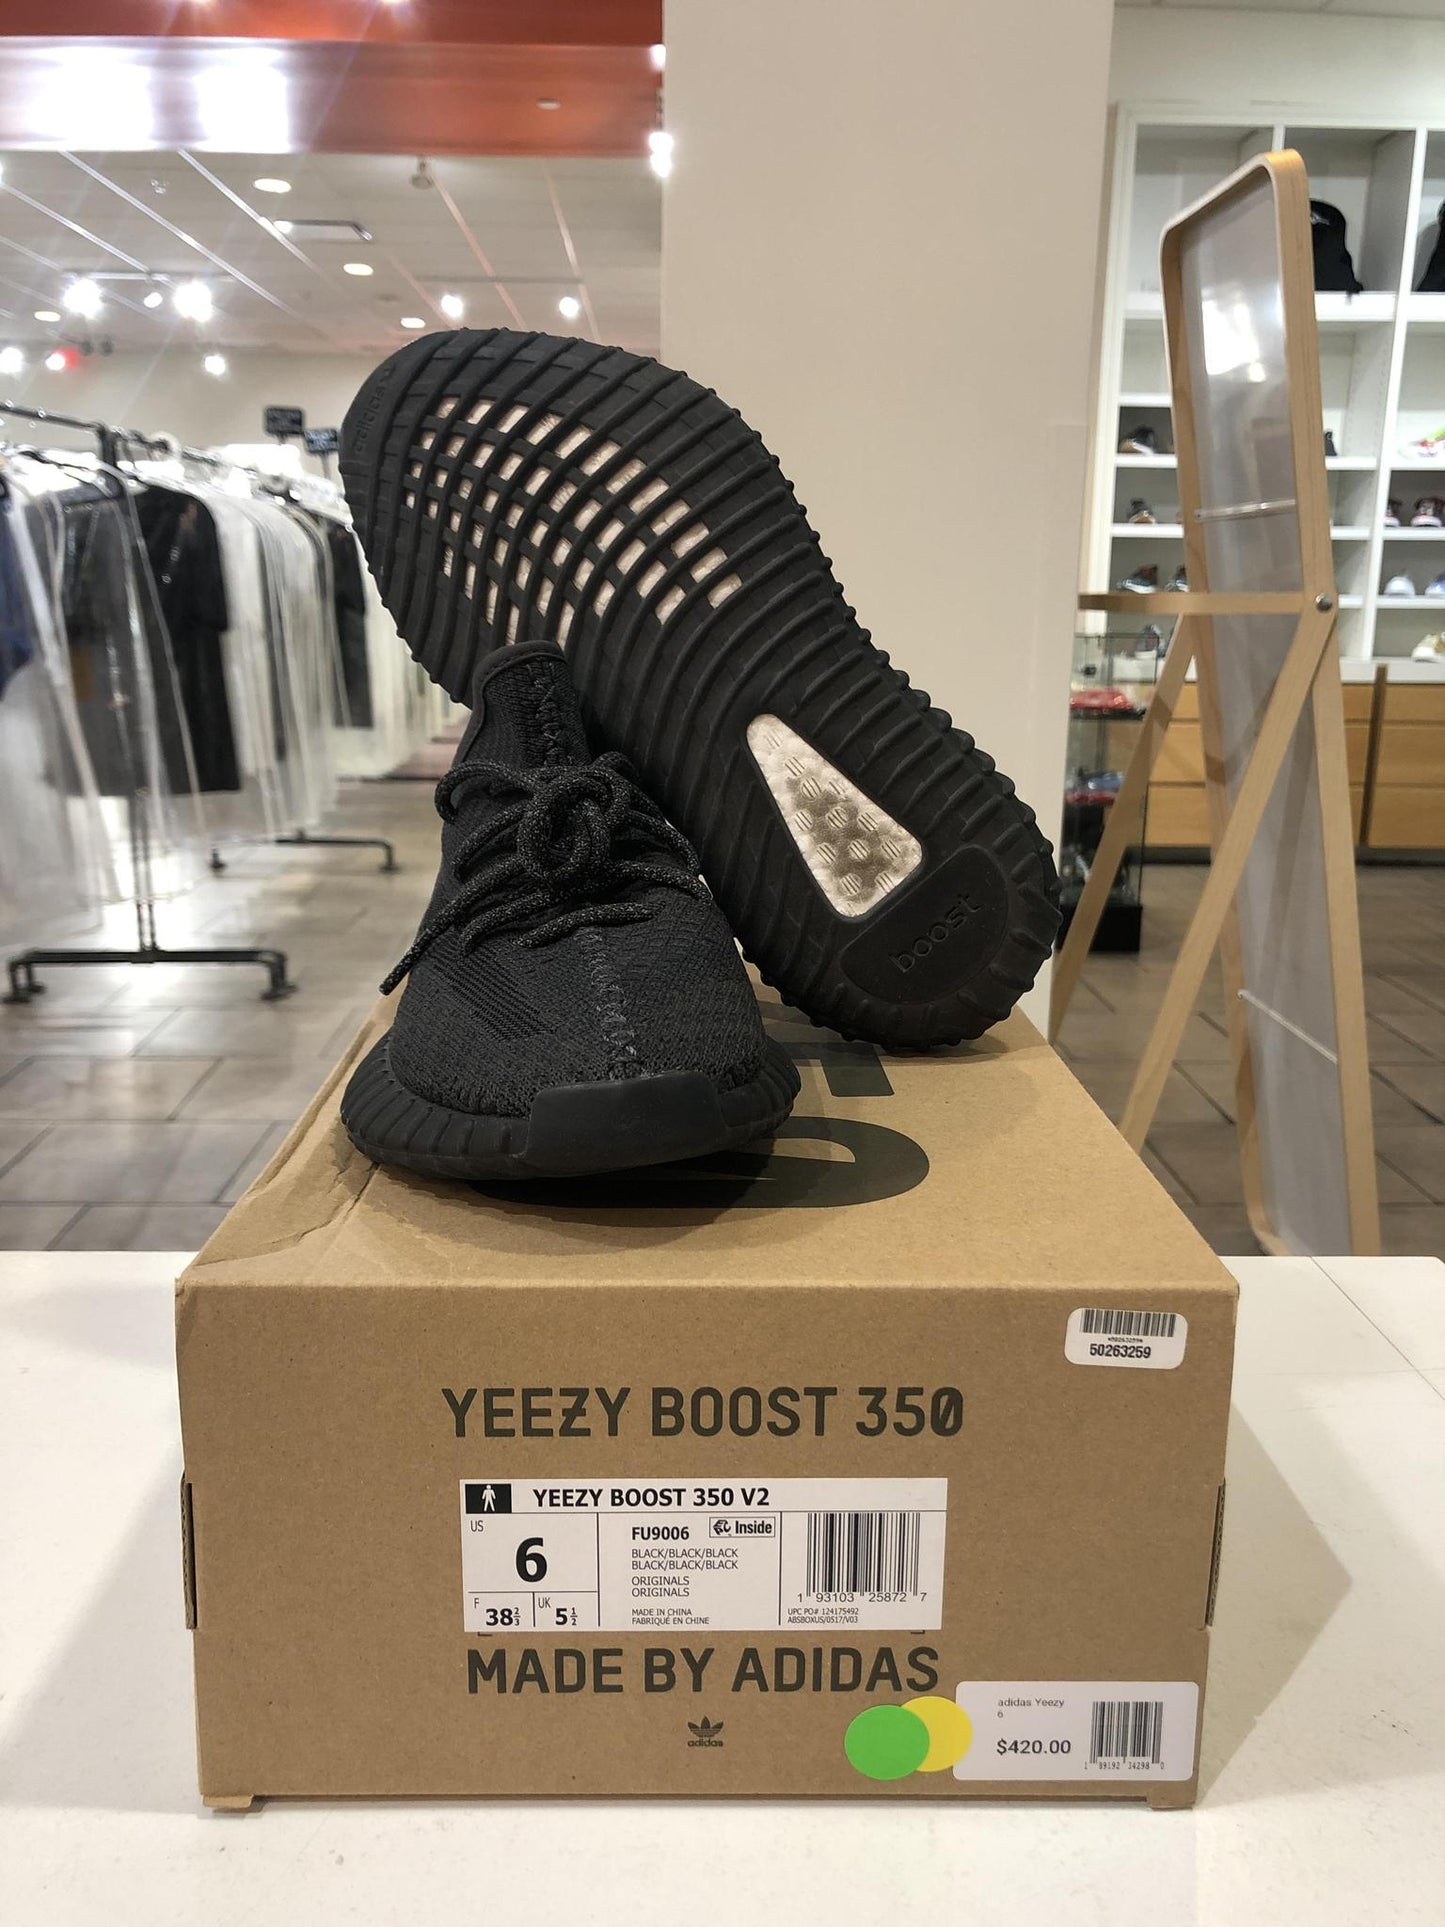 adidas Yeezy Boost 350 V2 Black (Non-Reflective) - FU9006 (Pre-owned)